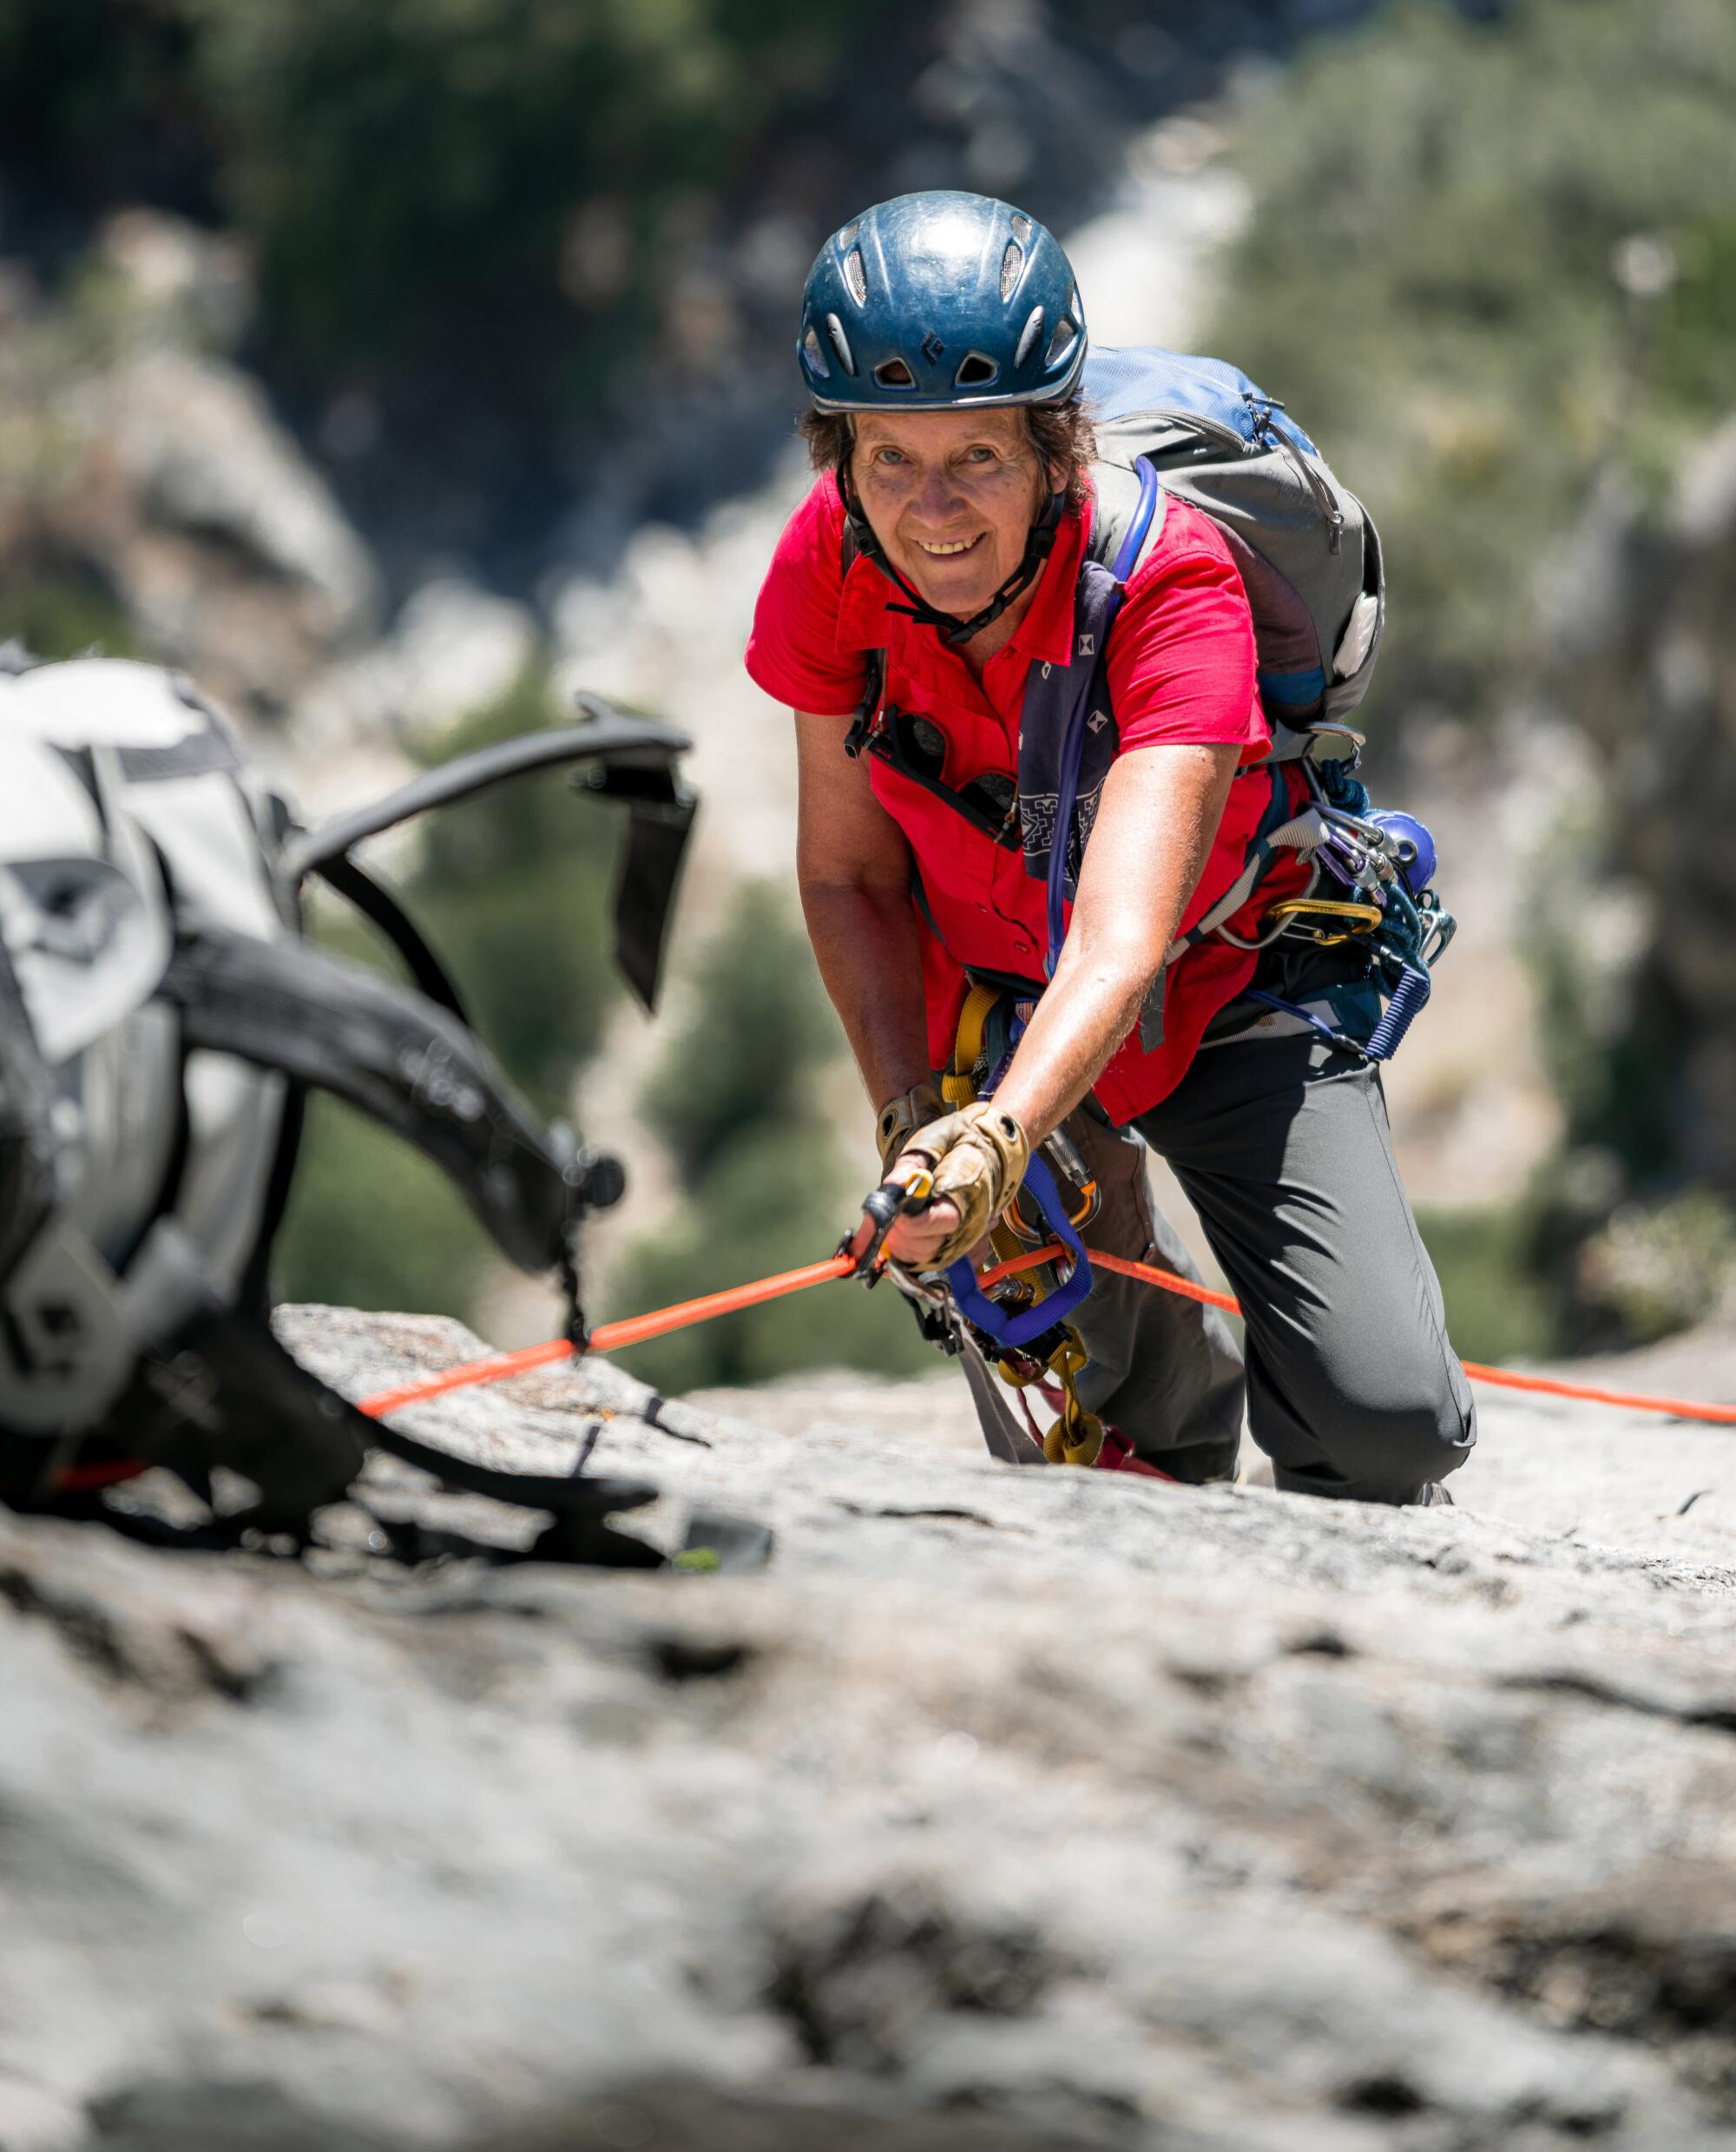 Dierdre Wolownick on her 10-hour climb to the top of El Capitan in the Yosemite Valley last September.